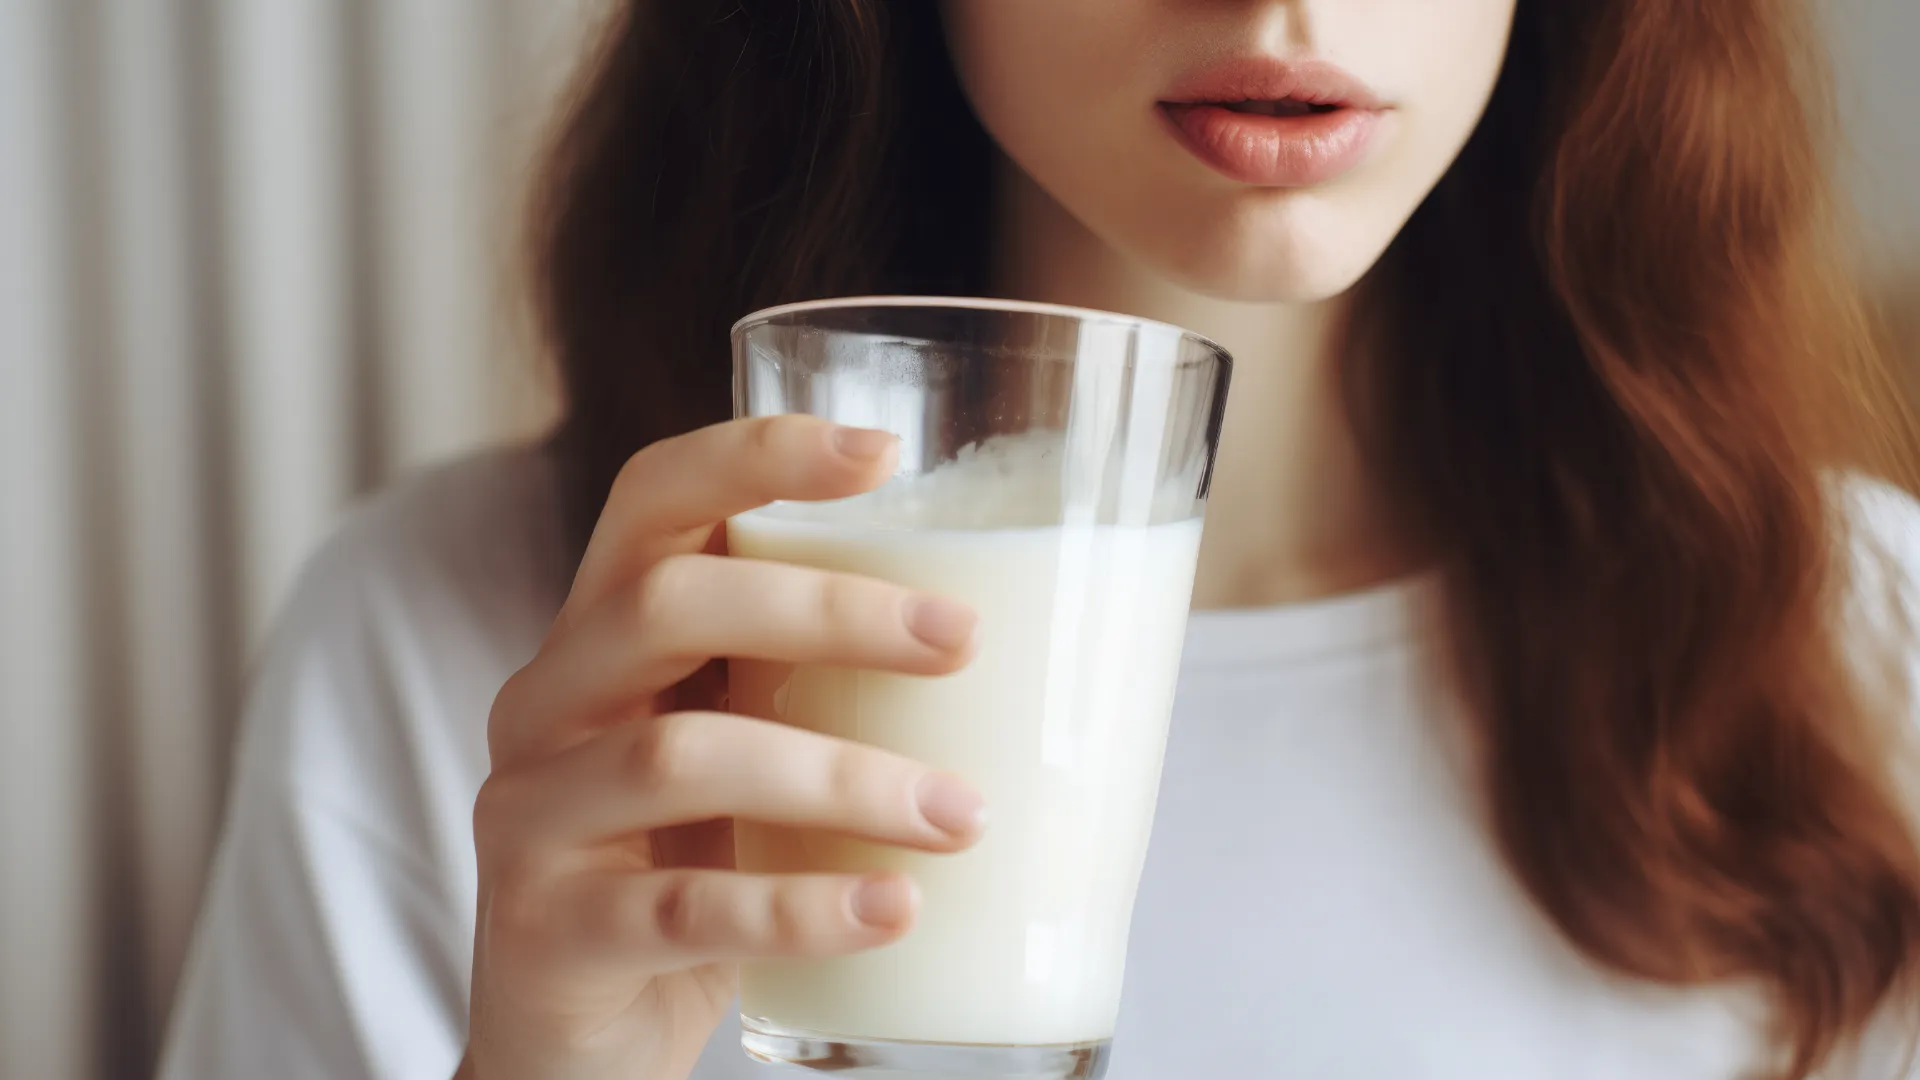 Woman having a reaction to drinking milk